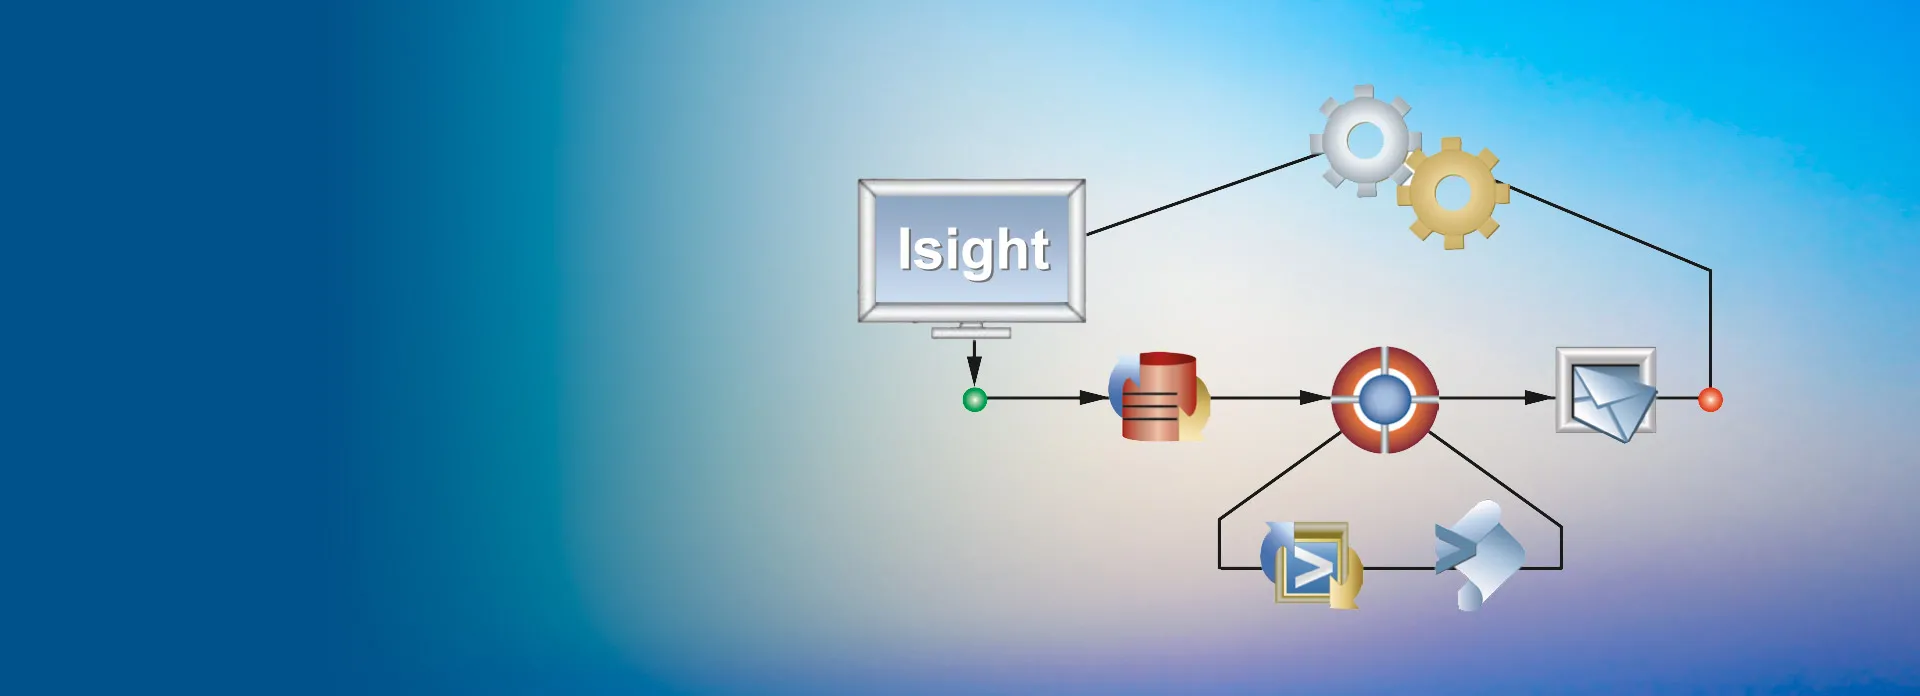 Isight and the SIMULA Execution Engine > Dassault Systemes